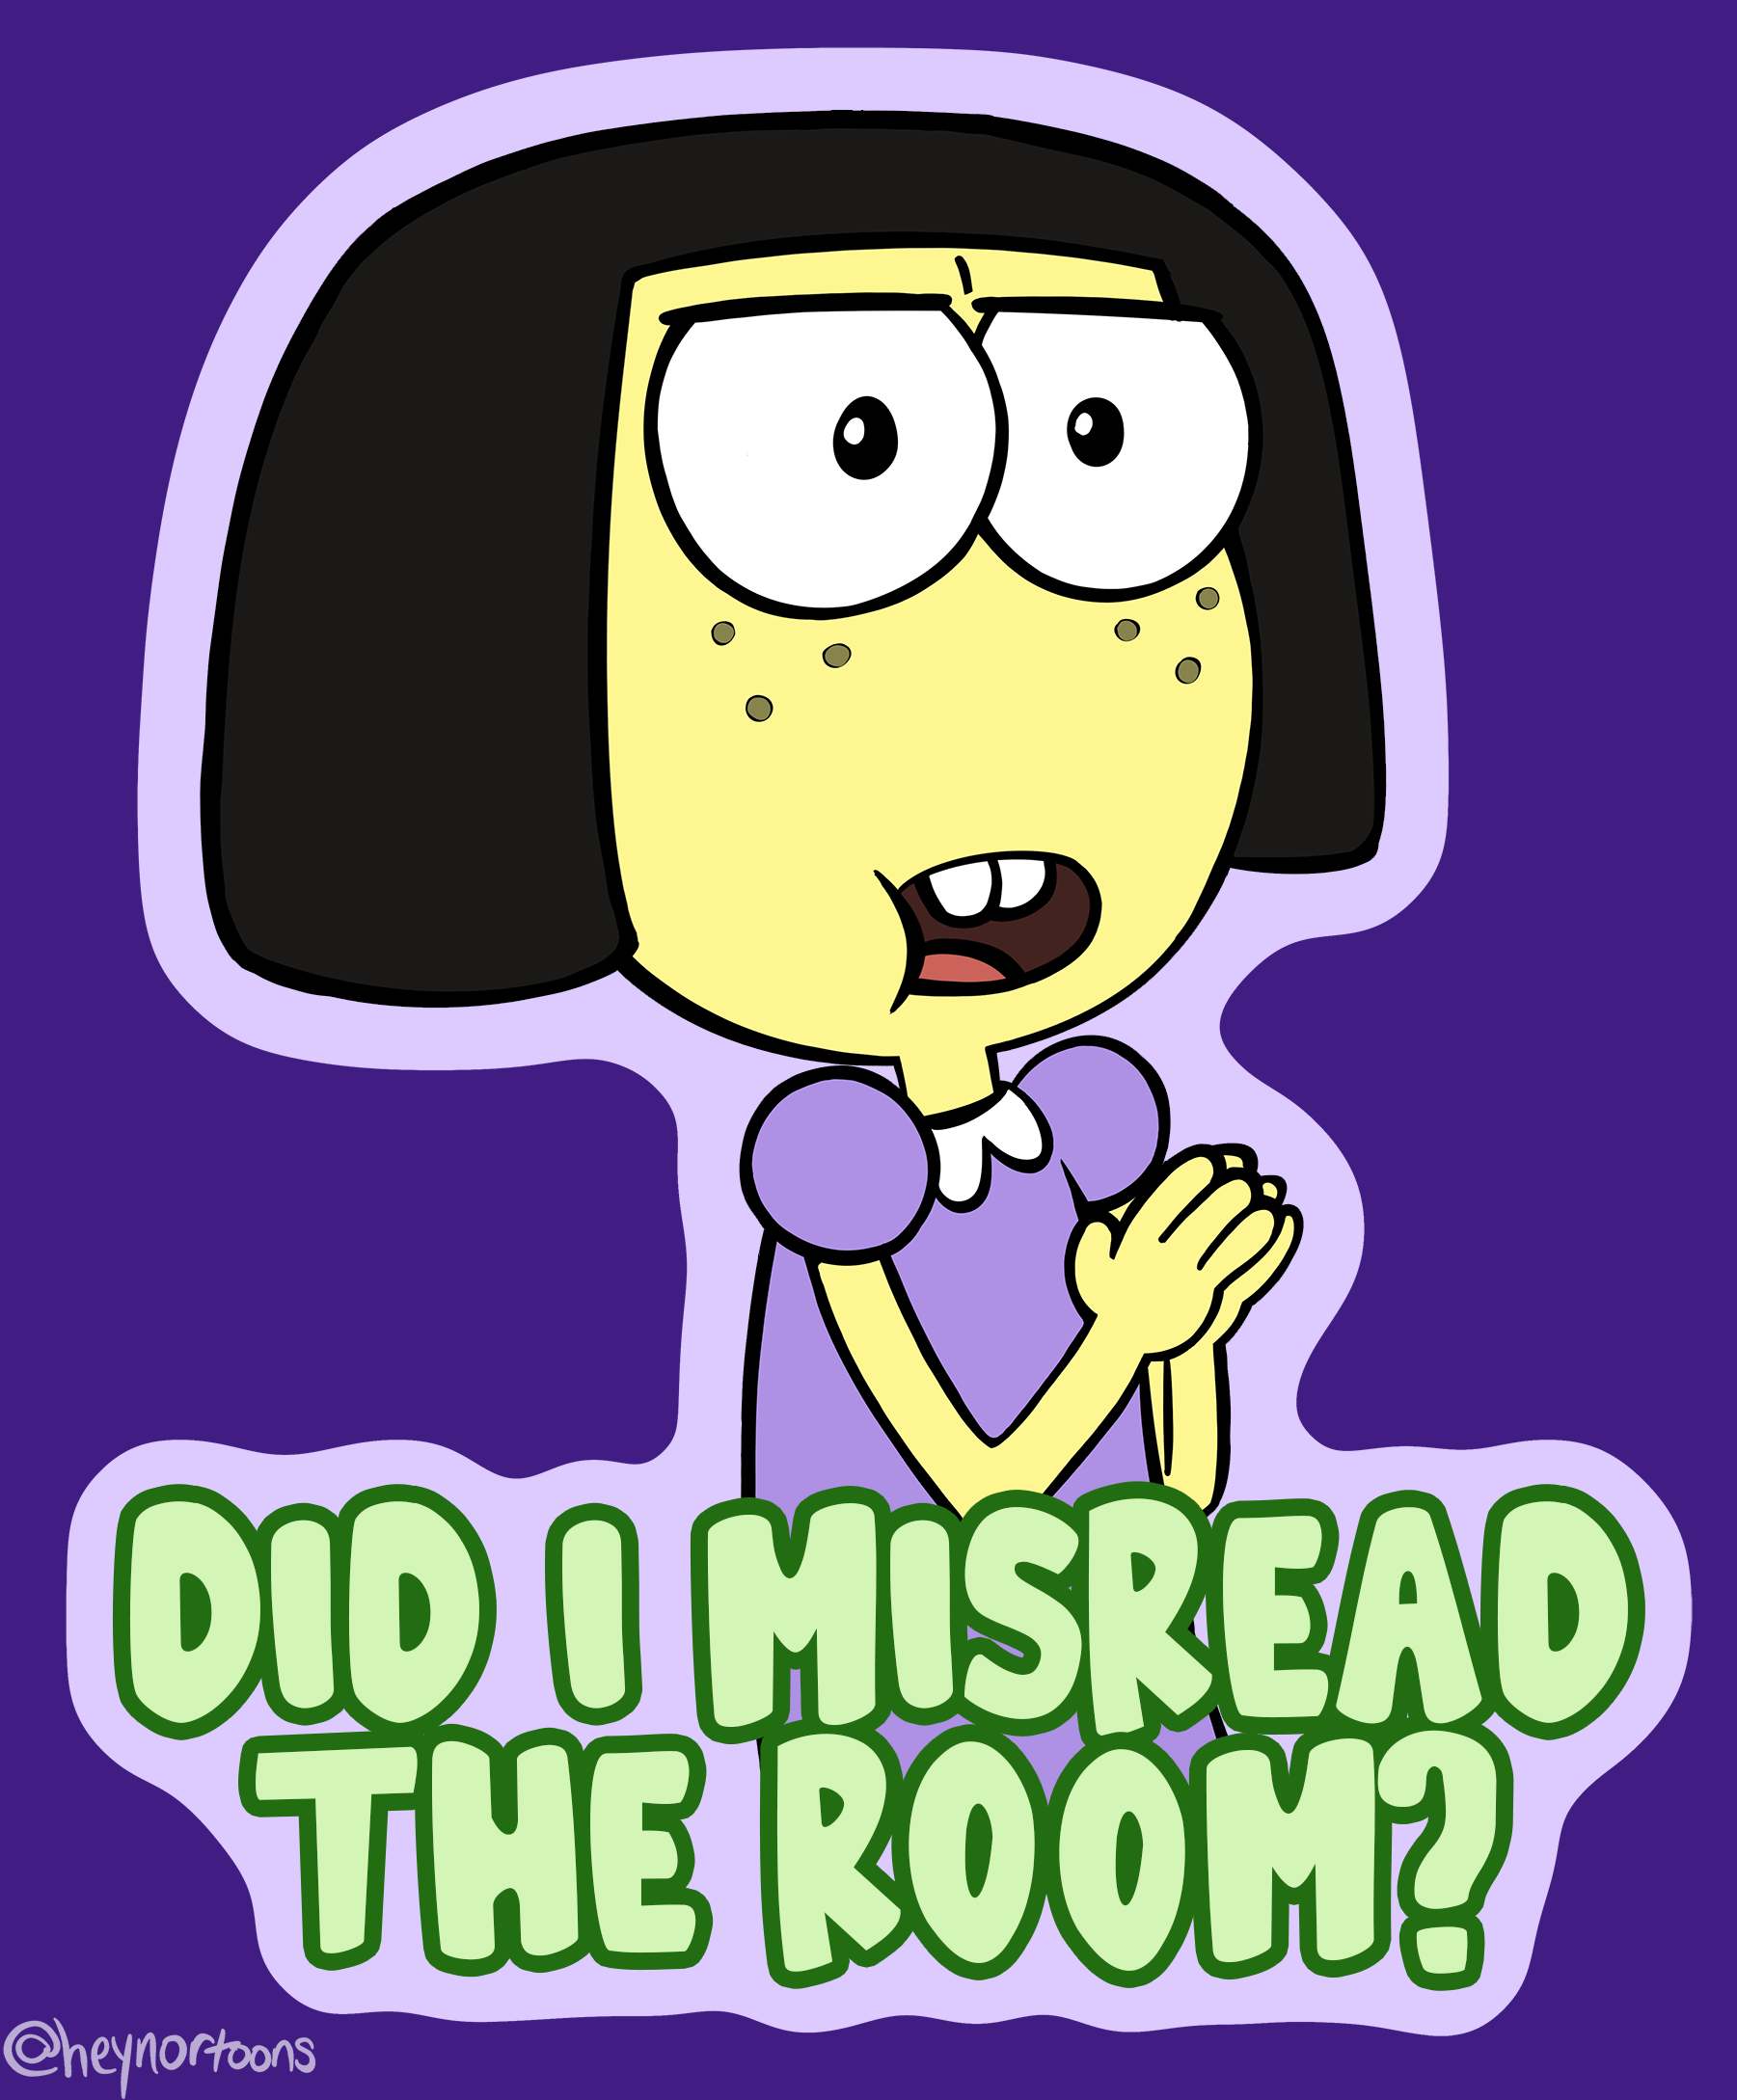 tilly misreads the room